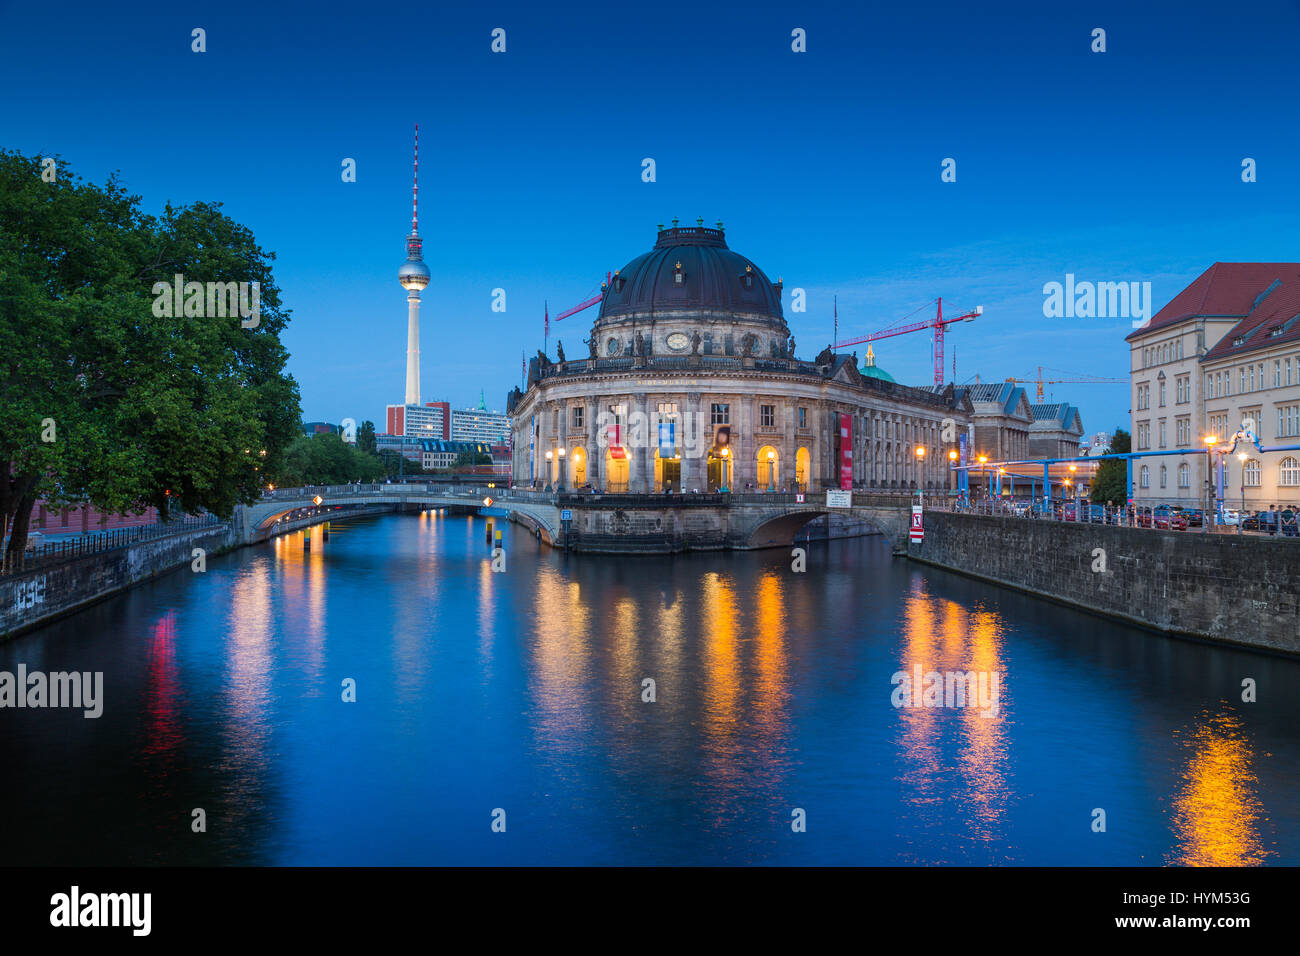 Beautiful view of famous Bode Museum at historic Museumsinsel (Museum Island) with TV tower and Spree river in twilight during blue hour at dusk, Berl Stock Photo